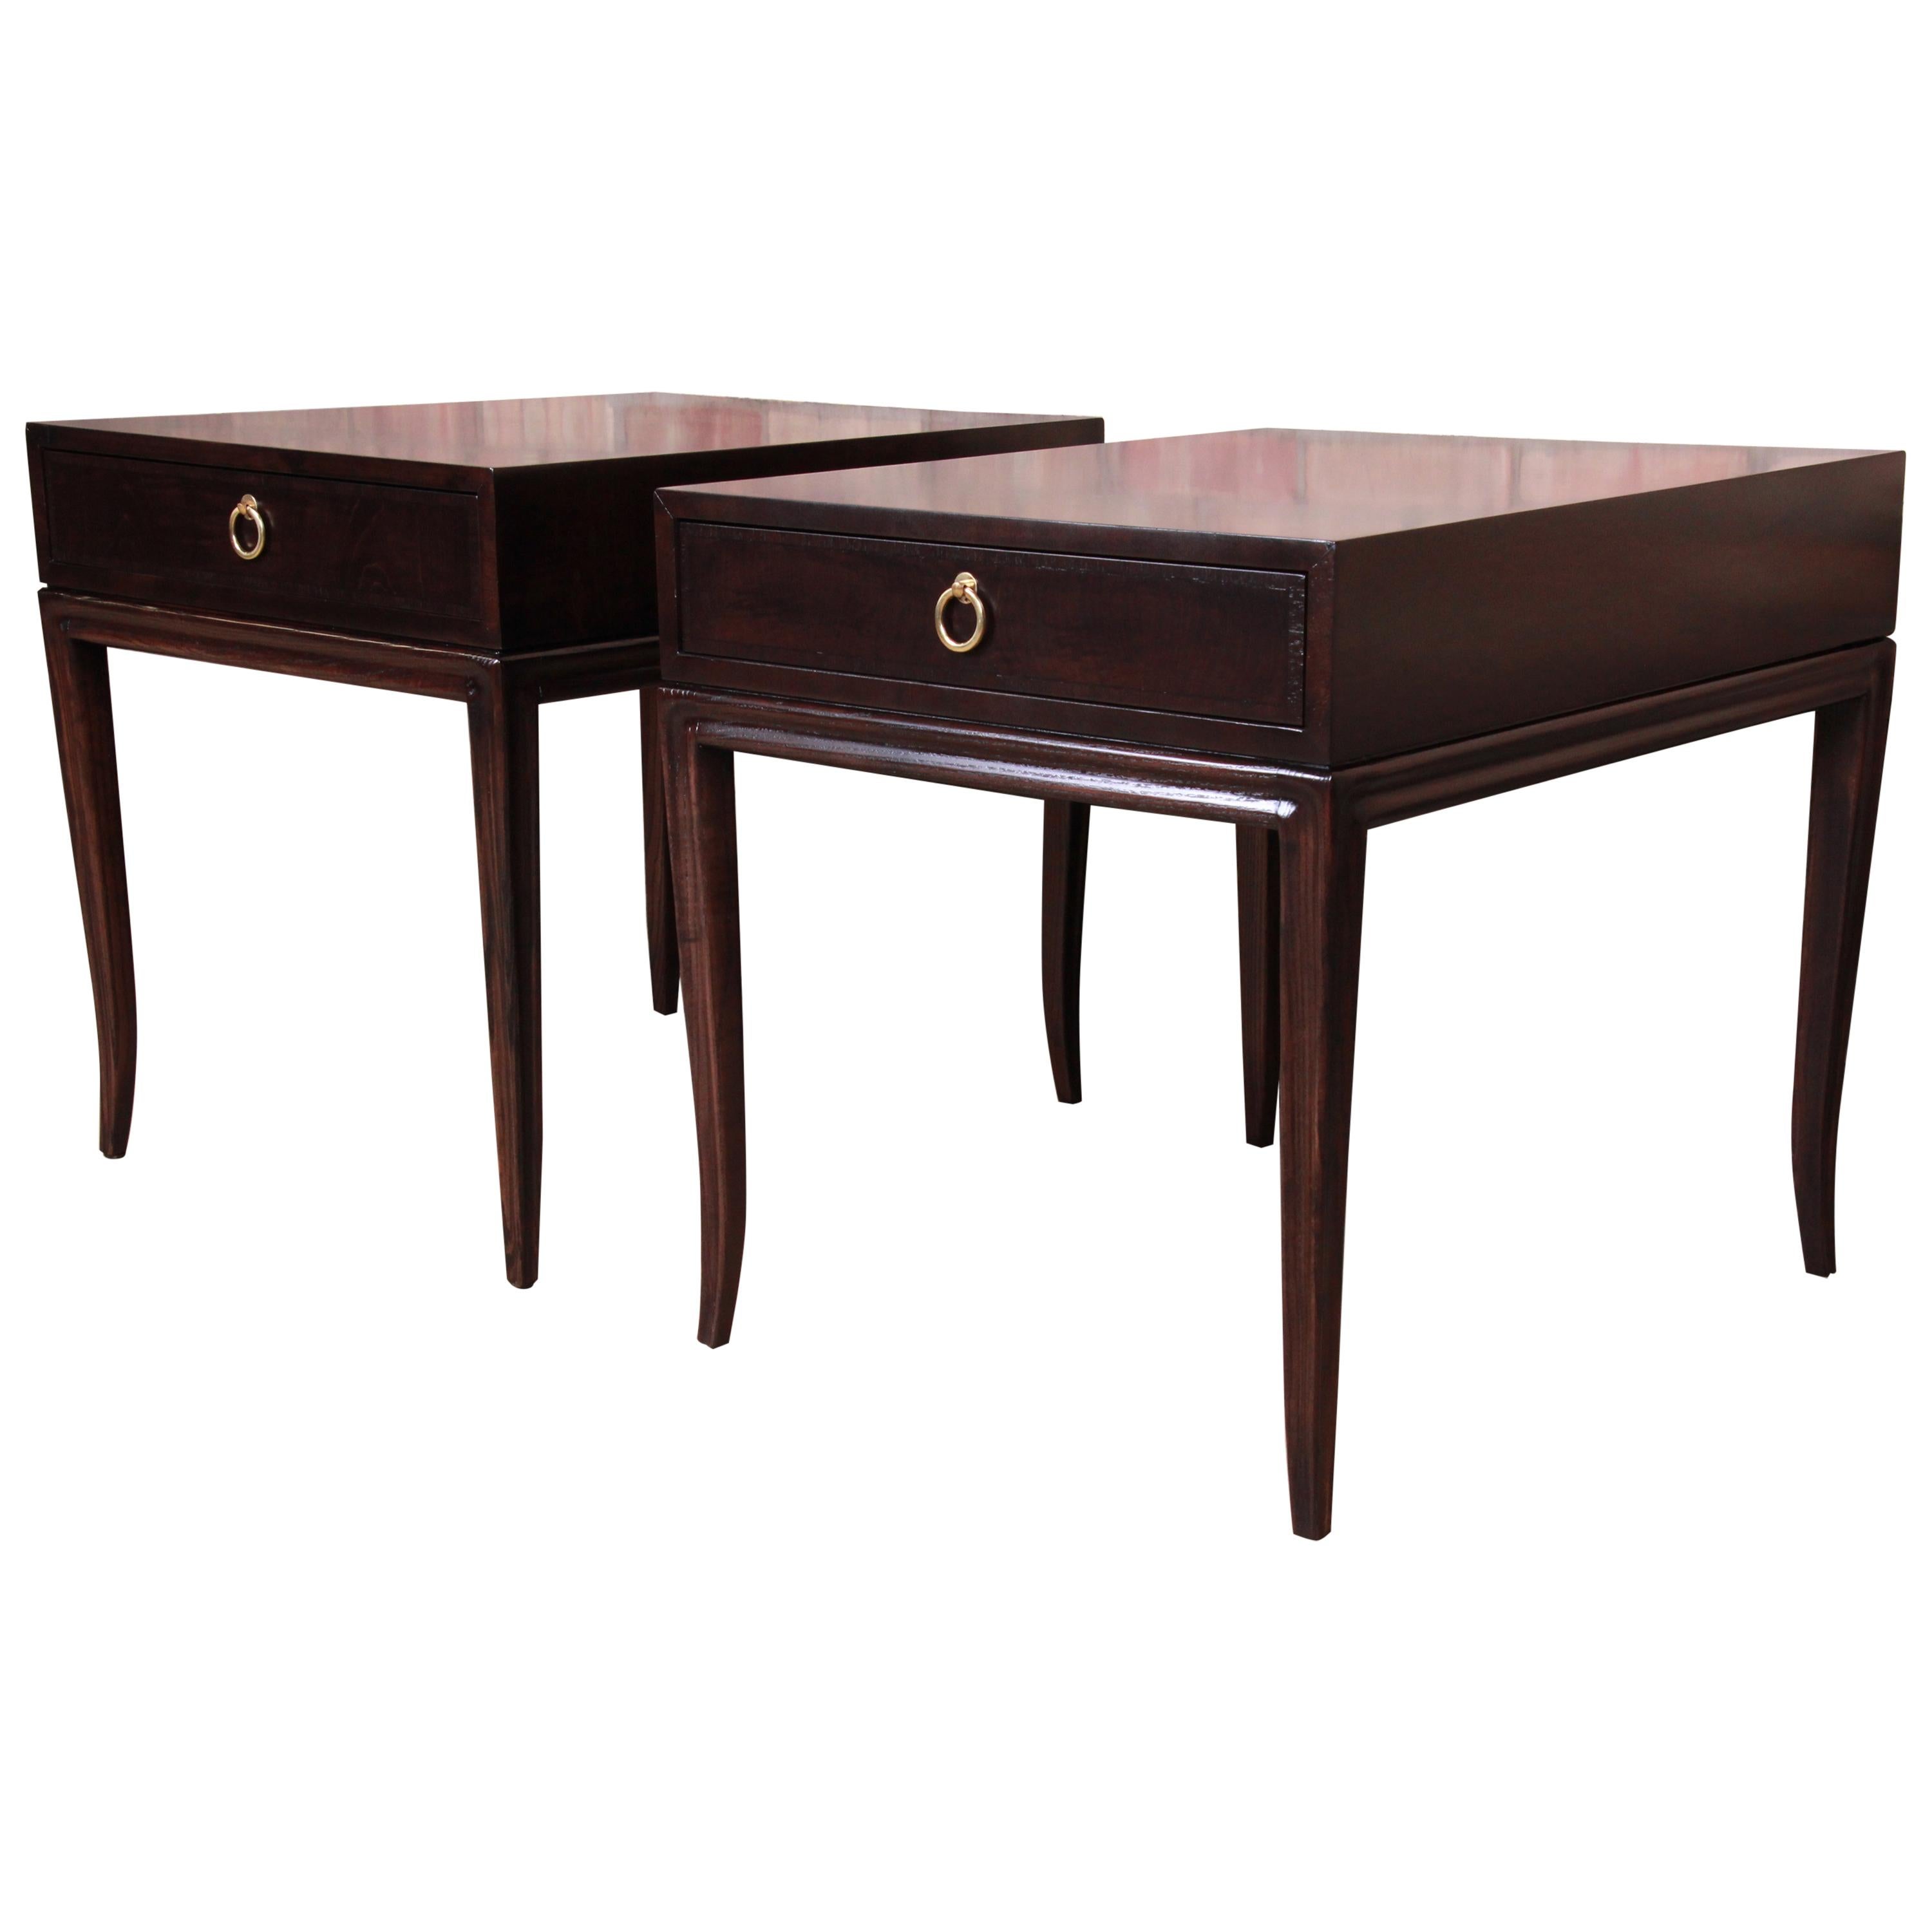 Drexel Heritage Hollywood Regency Mahogany Nightstands or End Tables, Refinished